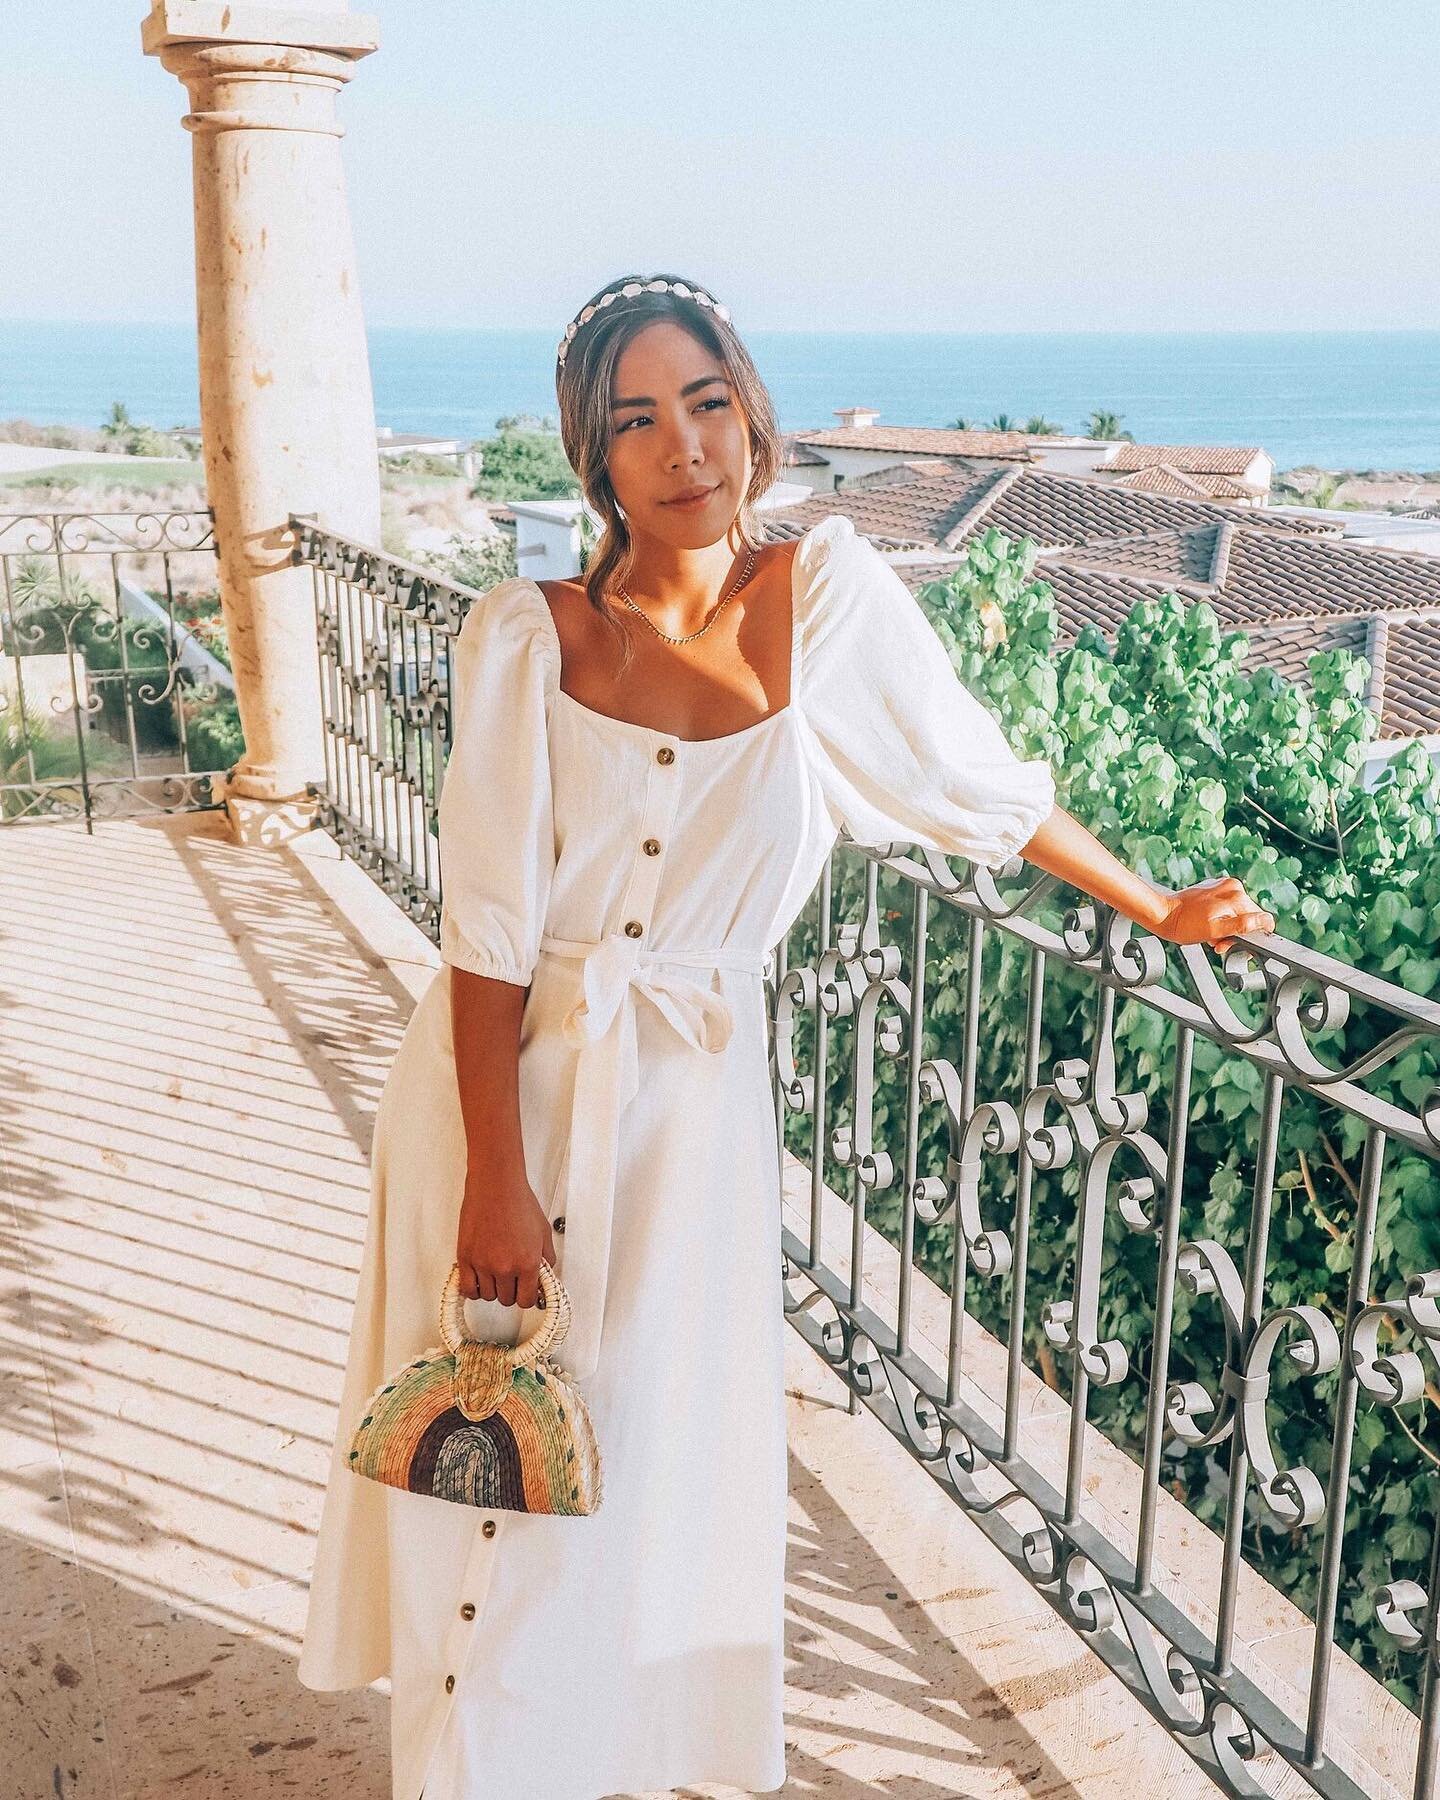 Looking &quot;extra&quot; is part of the vacation experience. I mean, where else am I going to wear this long white dress with big puff-sleeves? 🤷🏻&zwj;♀️😆🌴

Shop the look on my latest style blog! 😊 Link in bio. 

//⁣⁣⁣⁣⁣⁣⁣⁣ 
⁣⁣⁣⁣⁣⁣⁣⁣
#dametrave